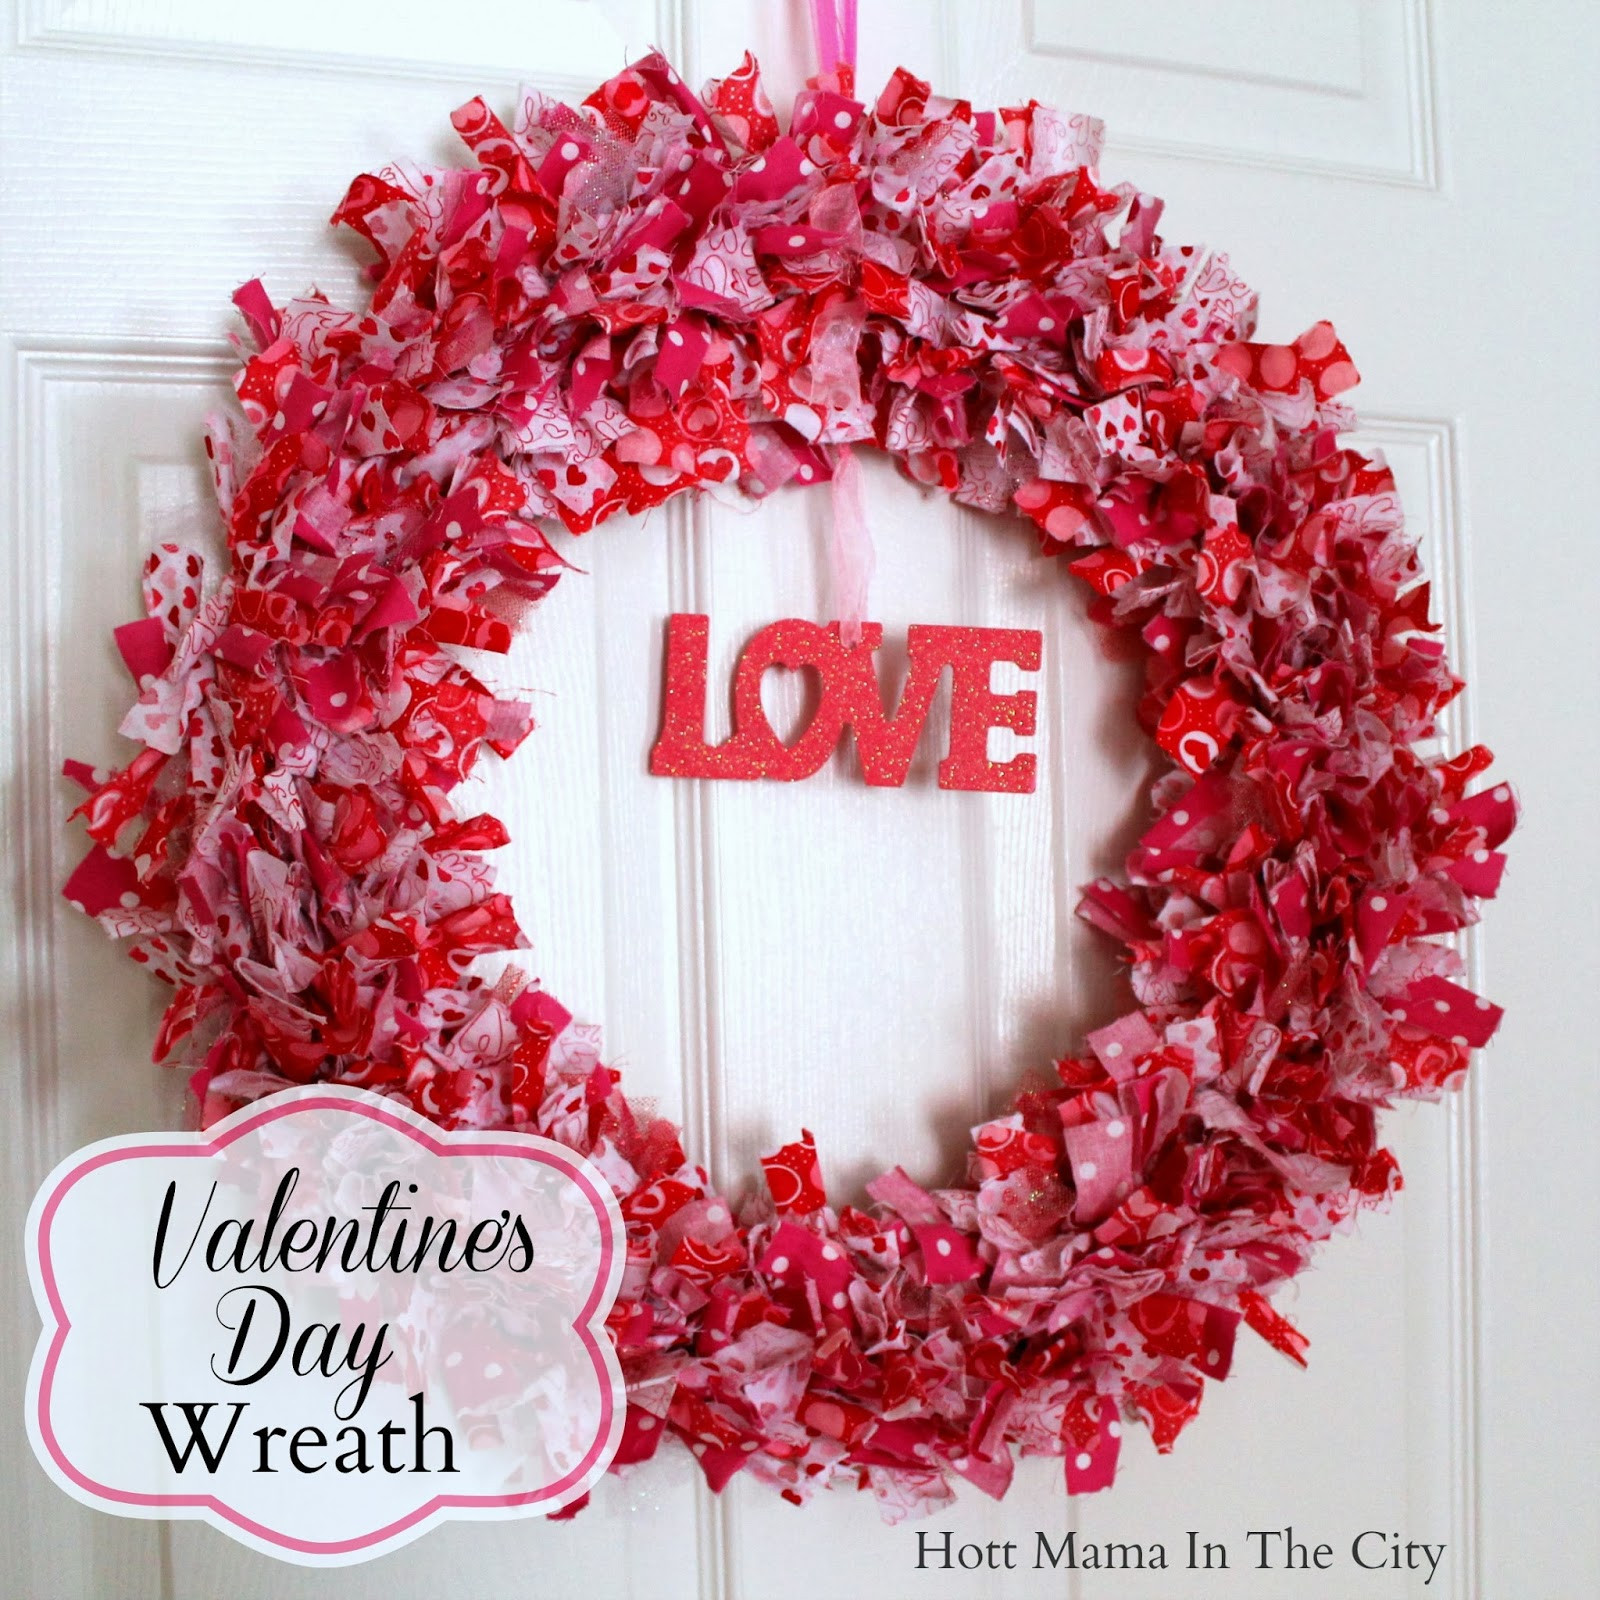 Valentines Day Wreath Ideas
 Hot Mama In The City Valentine s Day Fabric Wreath